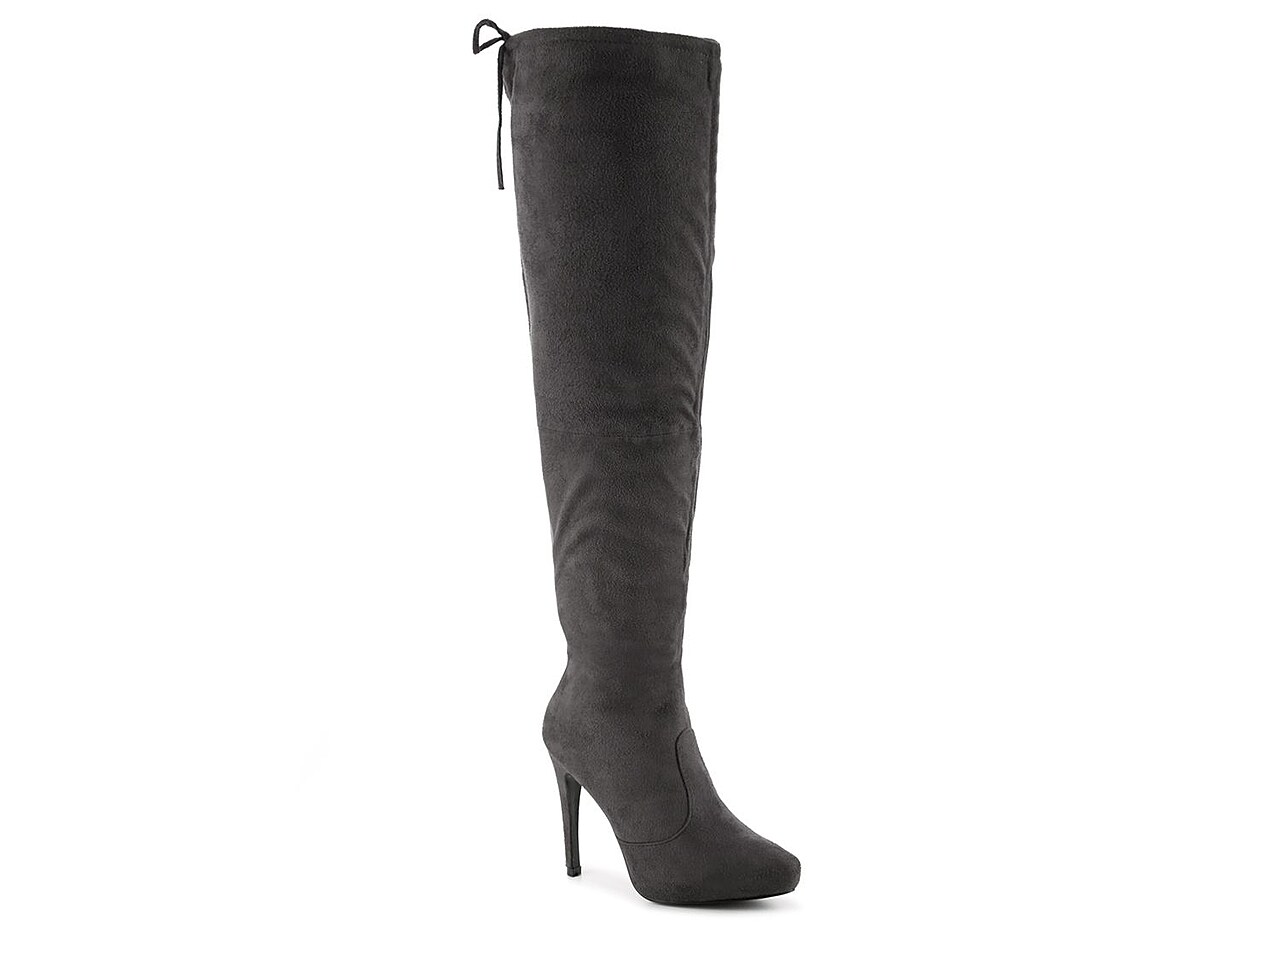 Journee Collection Magic Wide Calf Over The Knee Boot Women's Shoes DSW